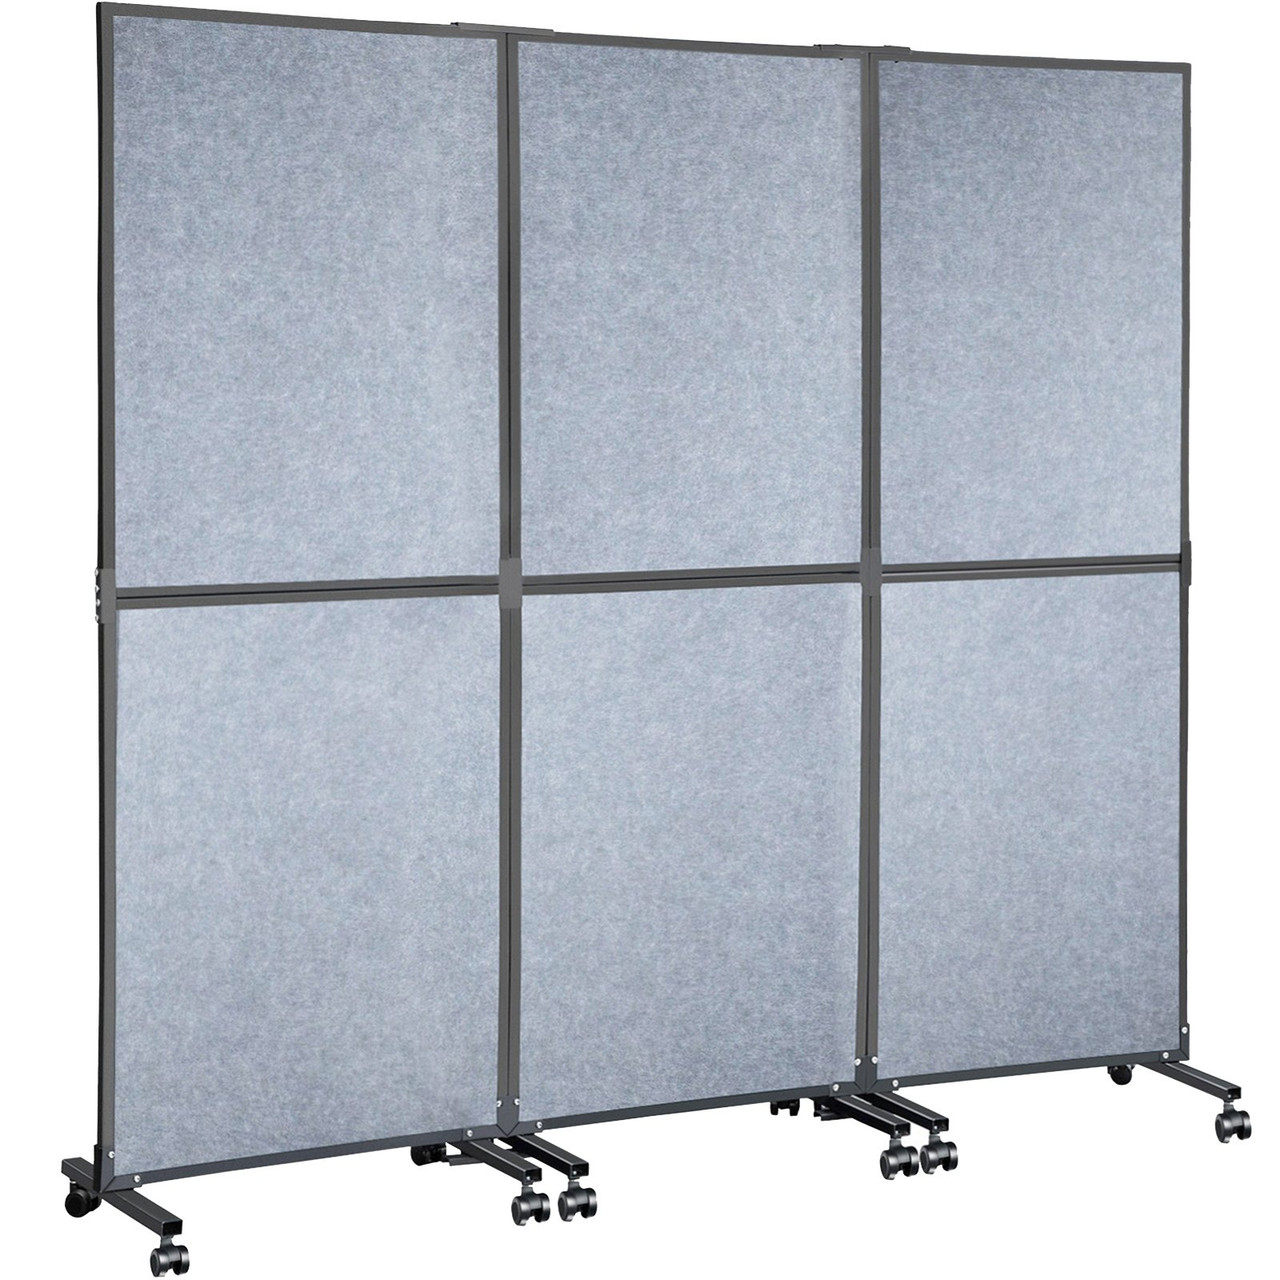 Acoustic Room Divider 72" x 66" Office Partition Panel 3 Pack Office Divider Wall Light Gray Office Dividers Partition Wall Polyester & 45 Steel Cubicle Wall Reduce Noise and Visual Distractions